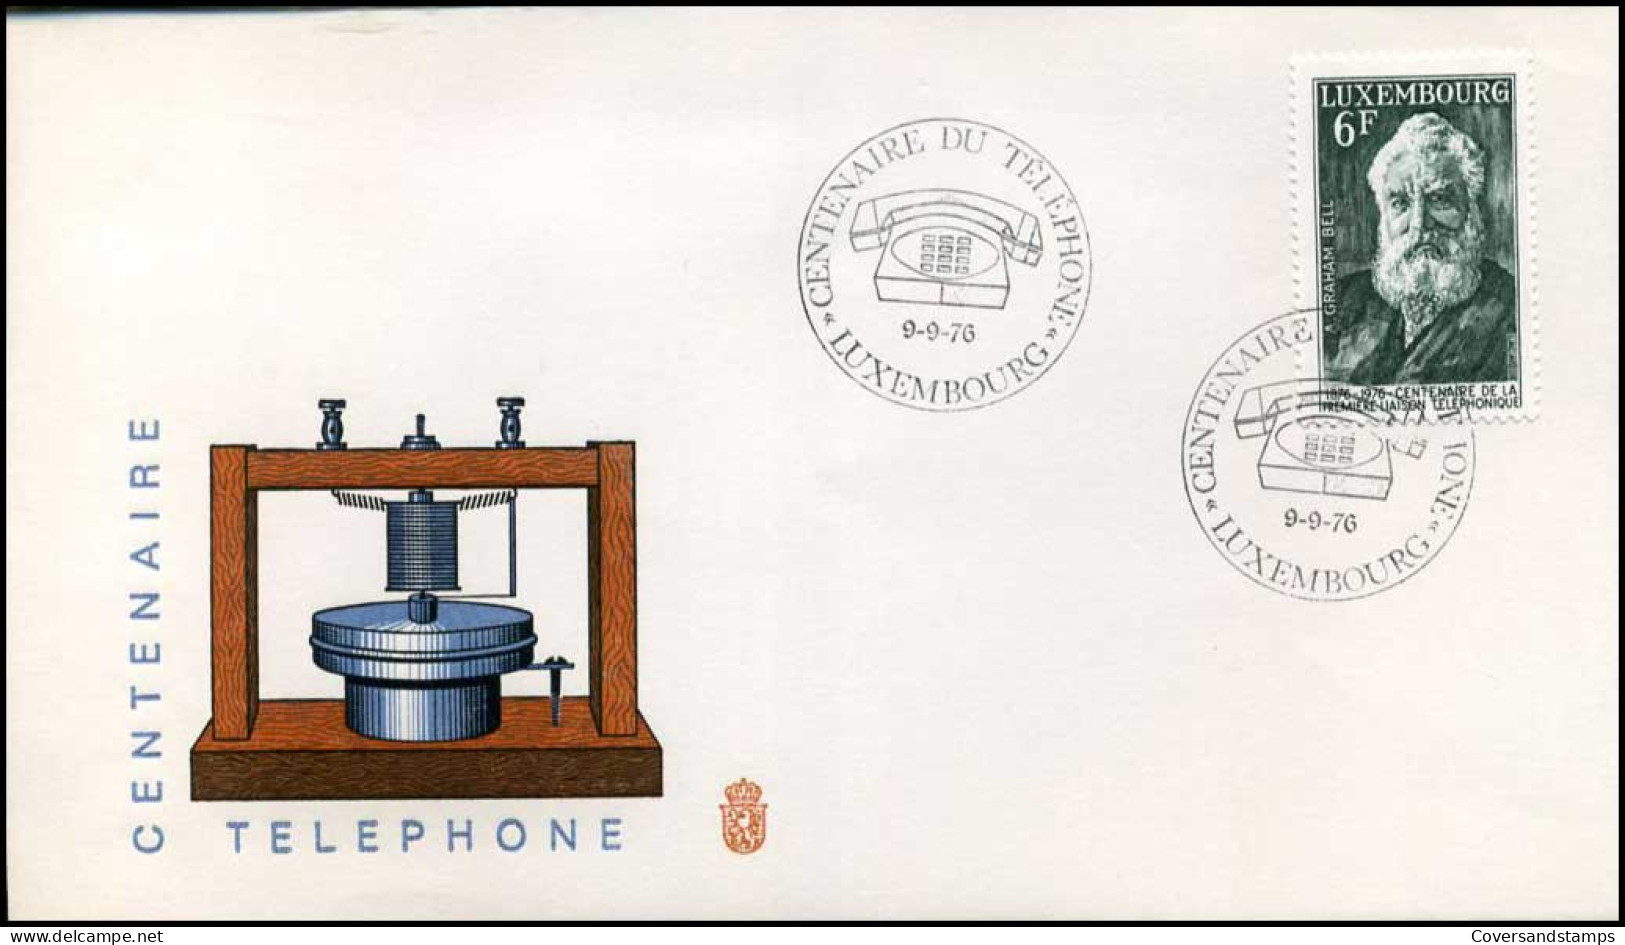 Luxembourg - FDC - Centenaire Telephone - FDC